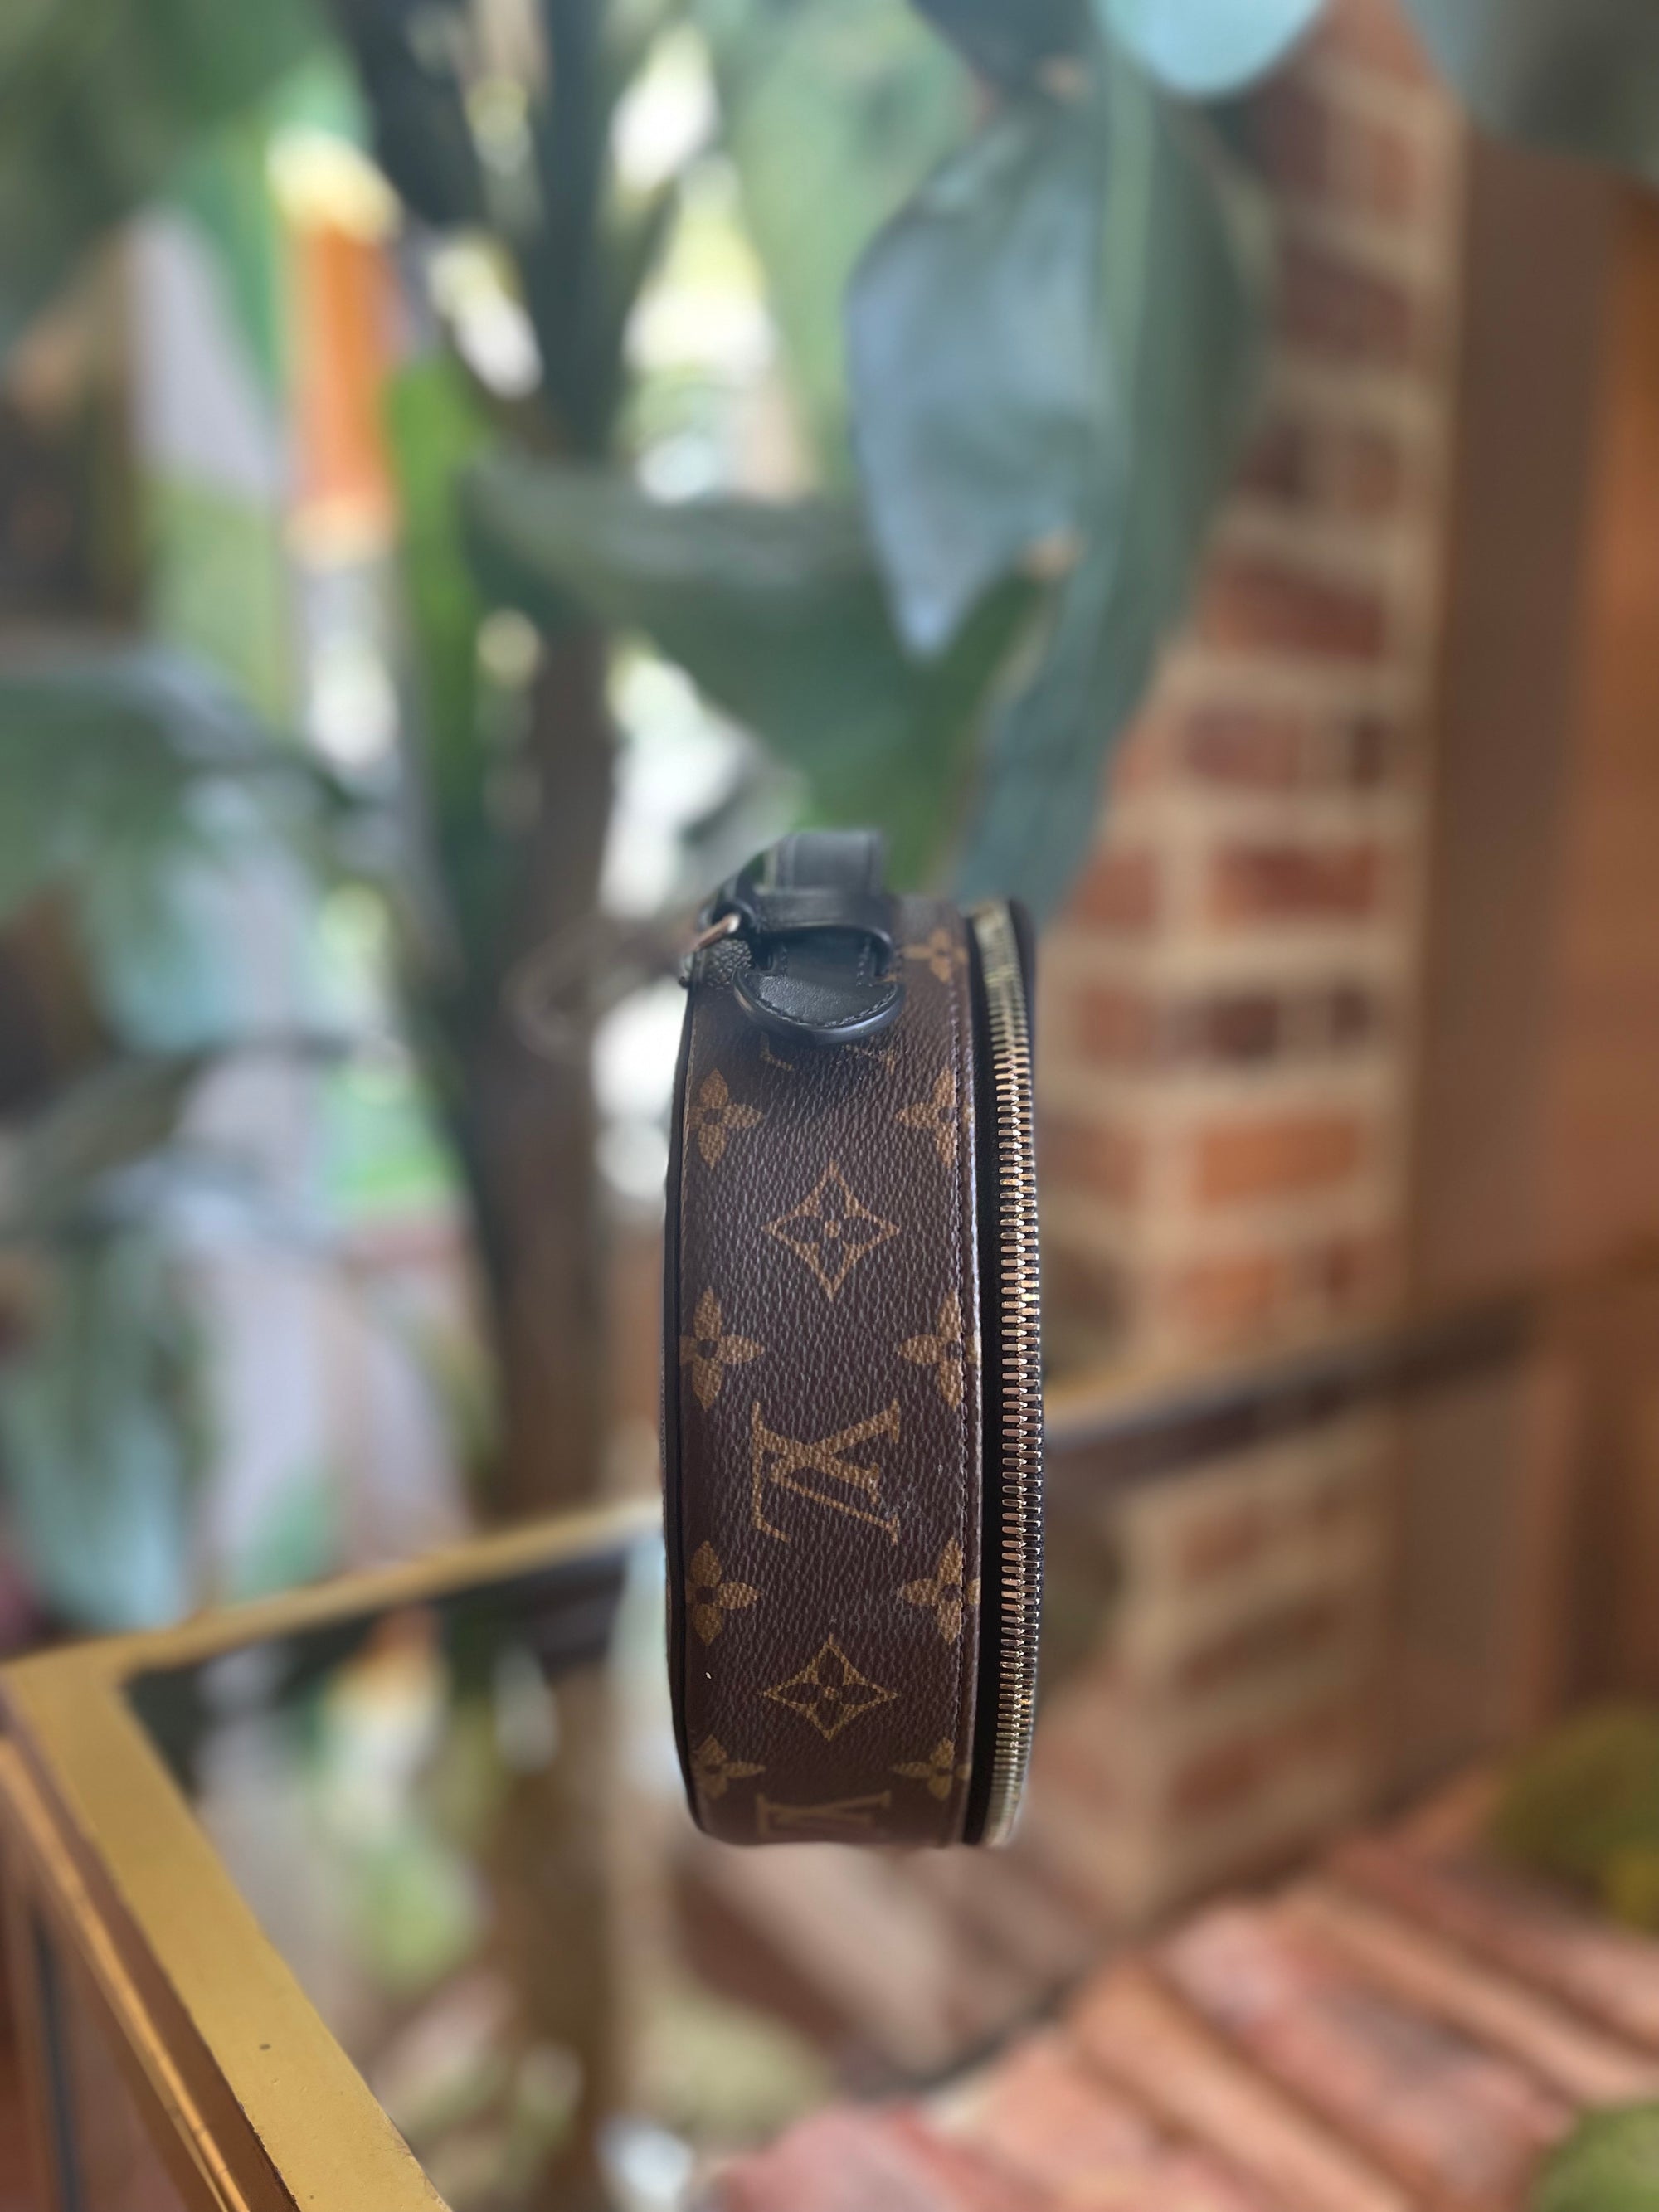 Authentic Louis Vuitton Bags, Shoes, and Accessories - The Purse Ladies